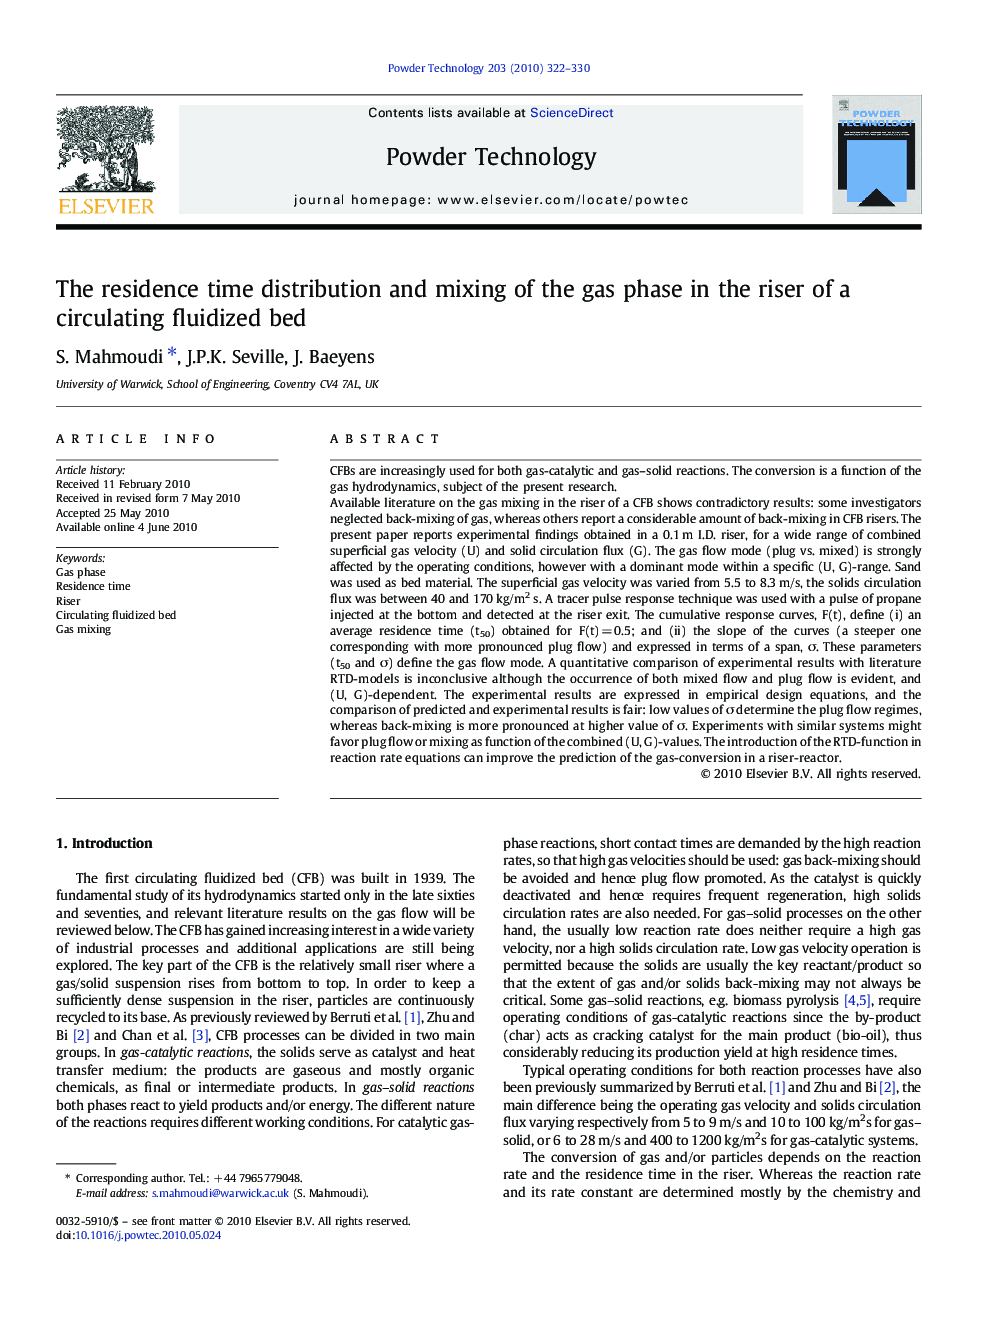 The residence time distribution and mixing of the gas phase in the riser of a circulating fluidized bed